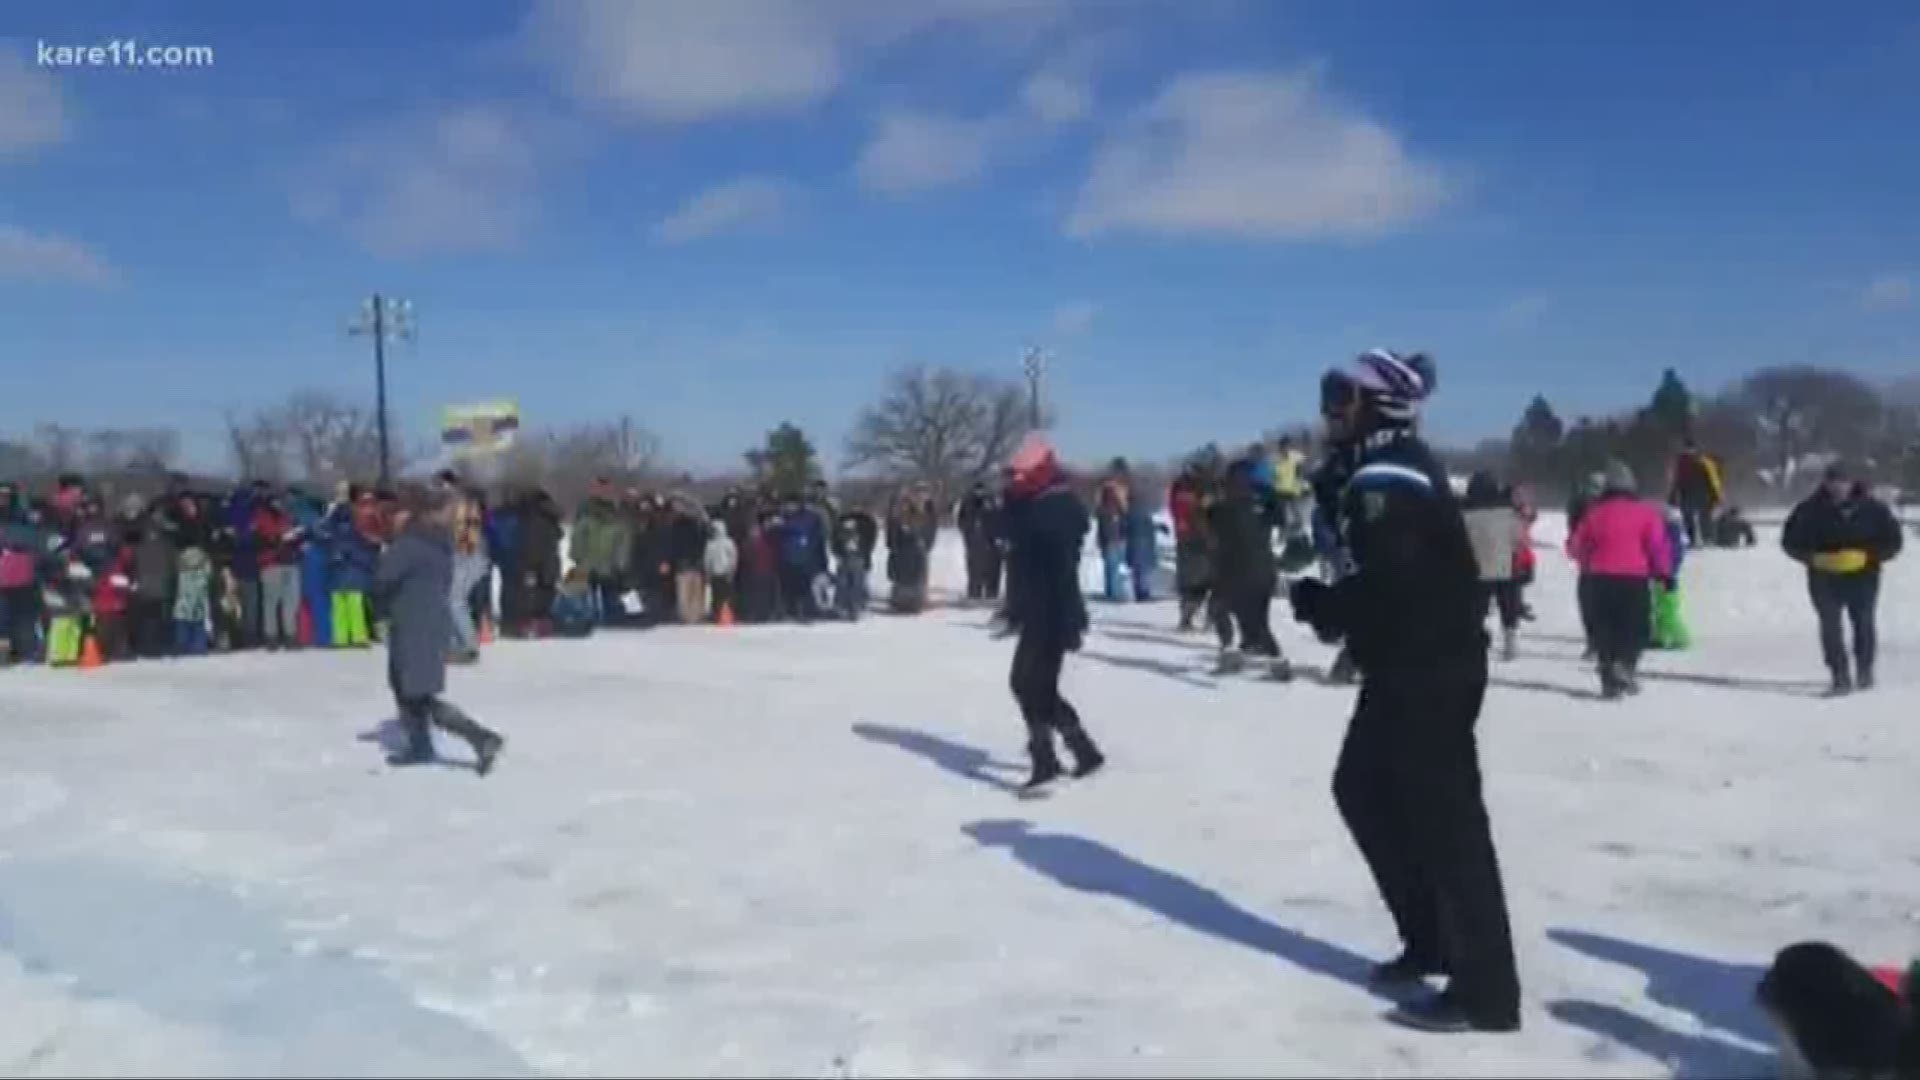 The mayors of the Twin Cities each came in pretty sure of themselves for the great Sunday snowball fight. The battle went down Sunday afternoon at the wind-swept McMurray Fields in St. Paul. Dozens of people came out to show support for their side of the river. https://kare11.tv/2EcsMHV